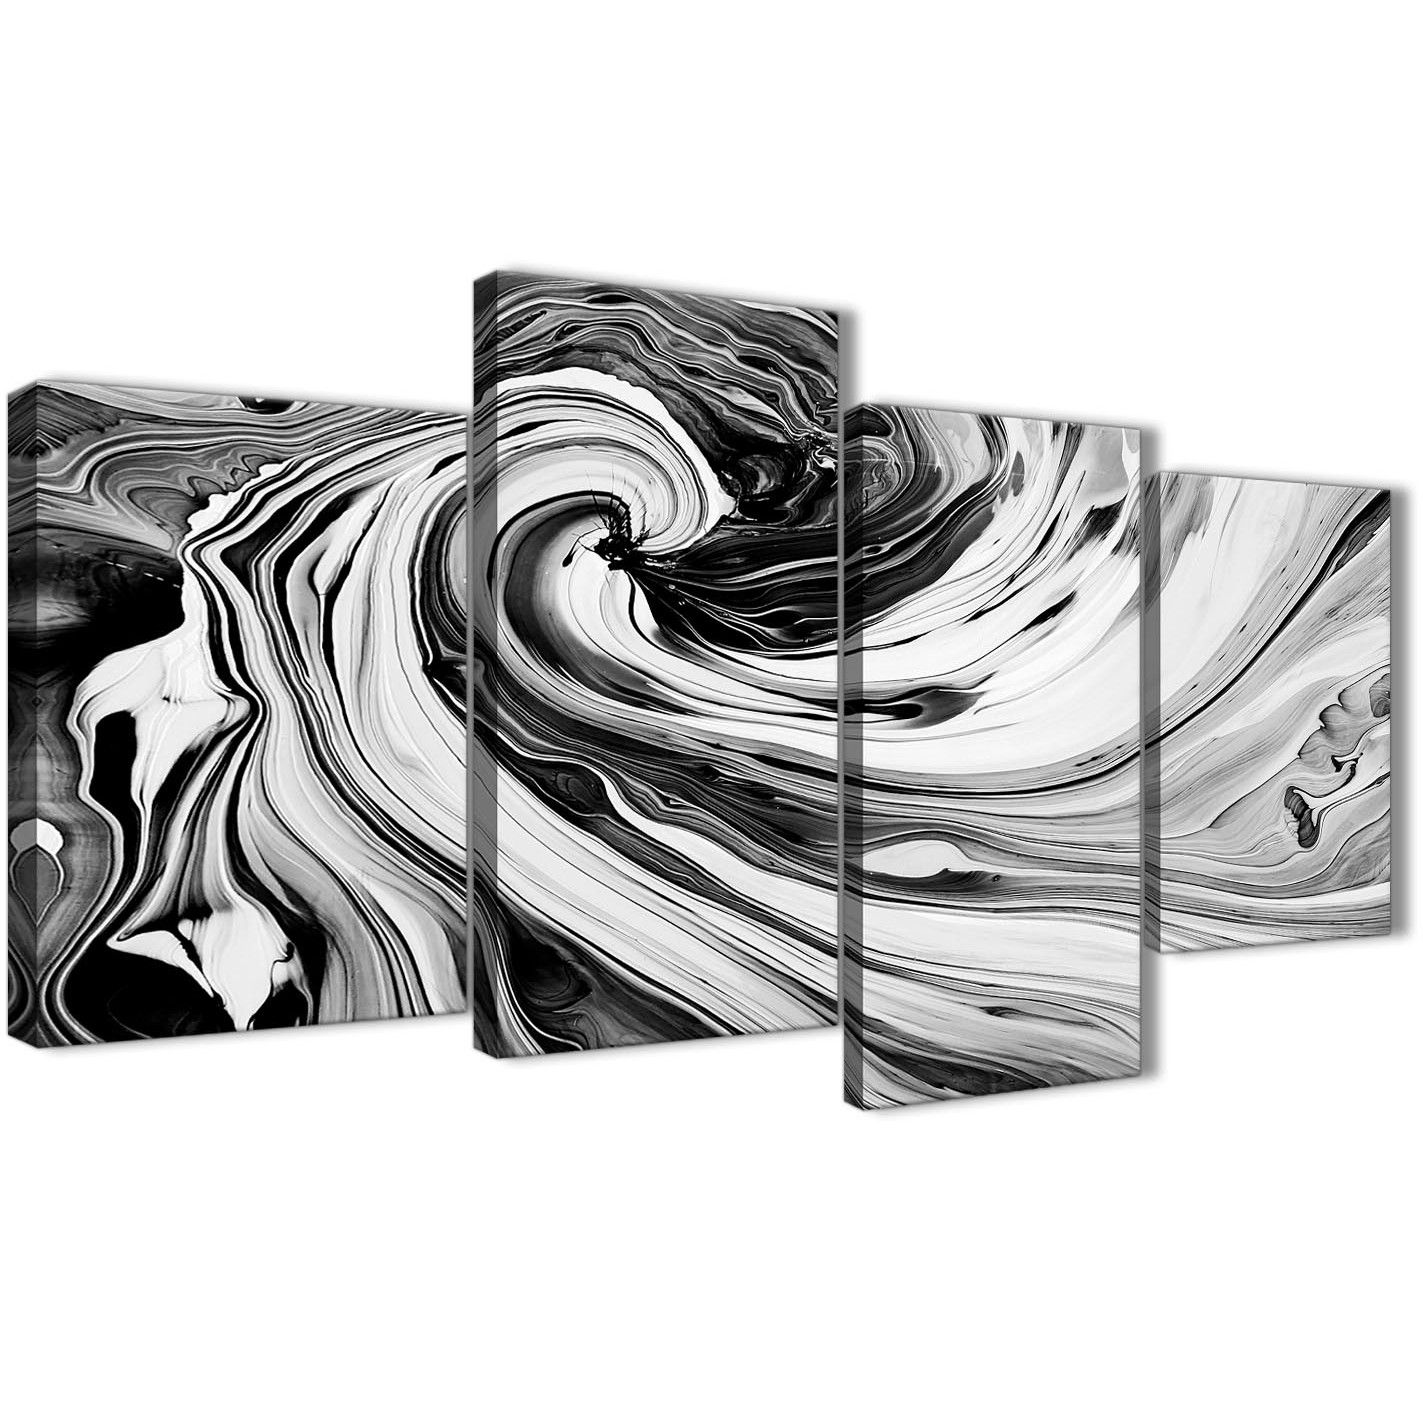 Large Black White Grey Swirls Modern Abstract Canvas Wall Art With Most Current Grey Abstract Canvas Wall Art (View 5 of 20)